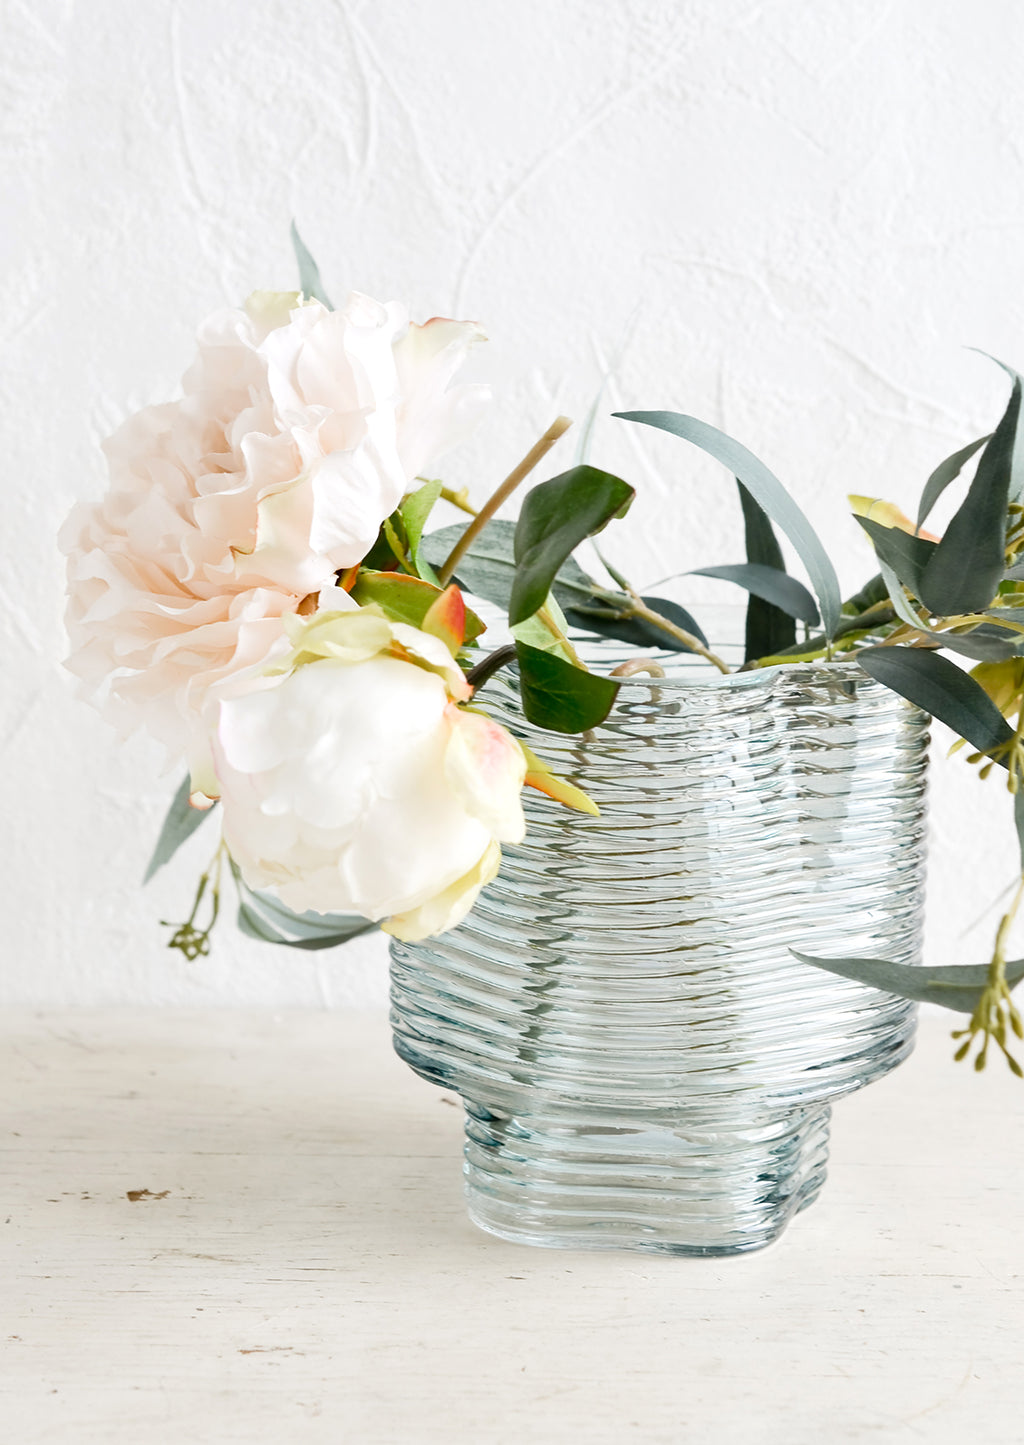 2: A ribbed blue glass vase with peonies.